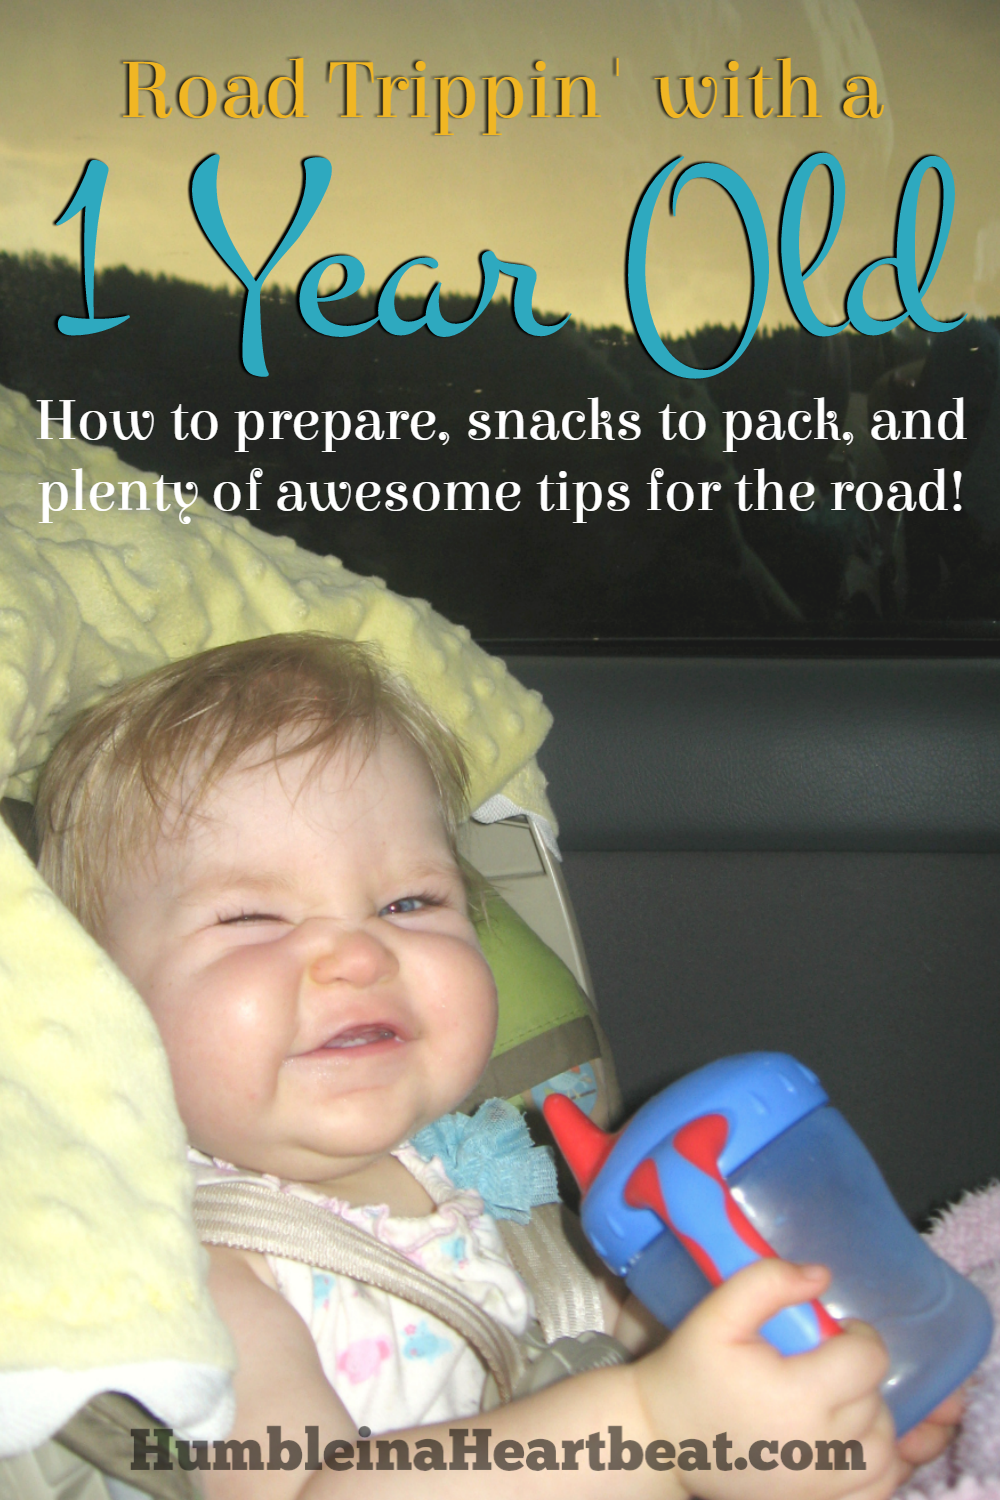 Planning to take a road trip with your 1 year old? These tips are incredible and I wish I had thought of them the last time we traveled with our child!